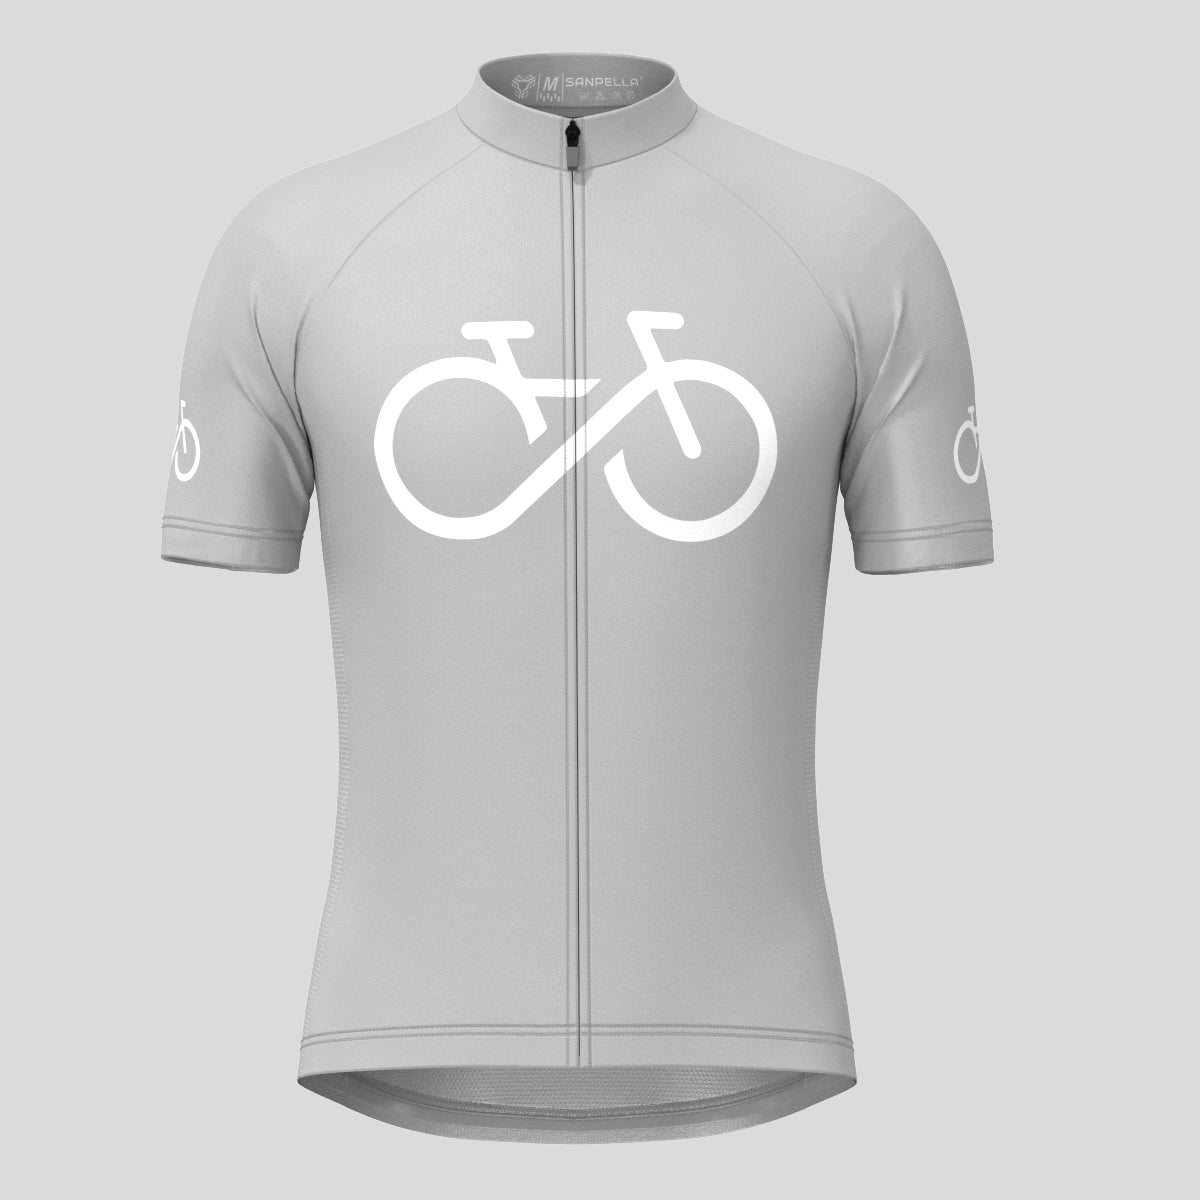 Bike Forever Men's Cycling Jersey -Gray